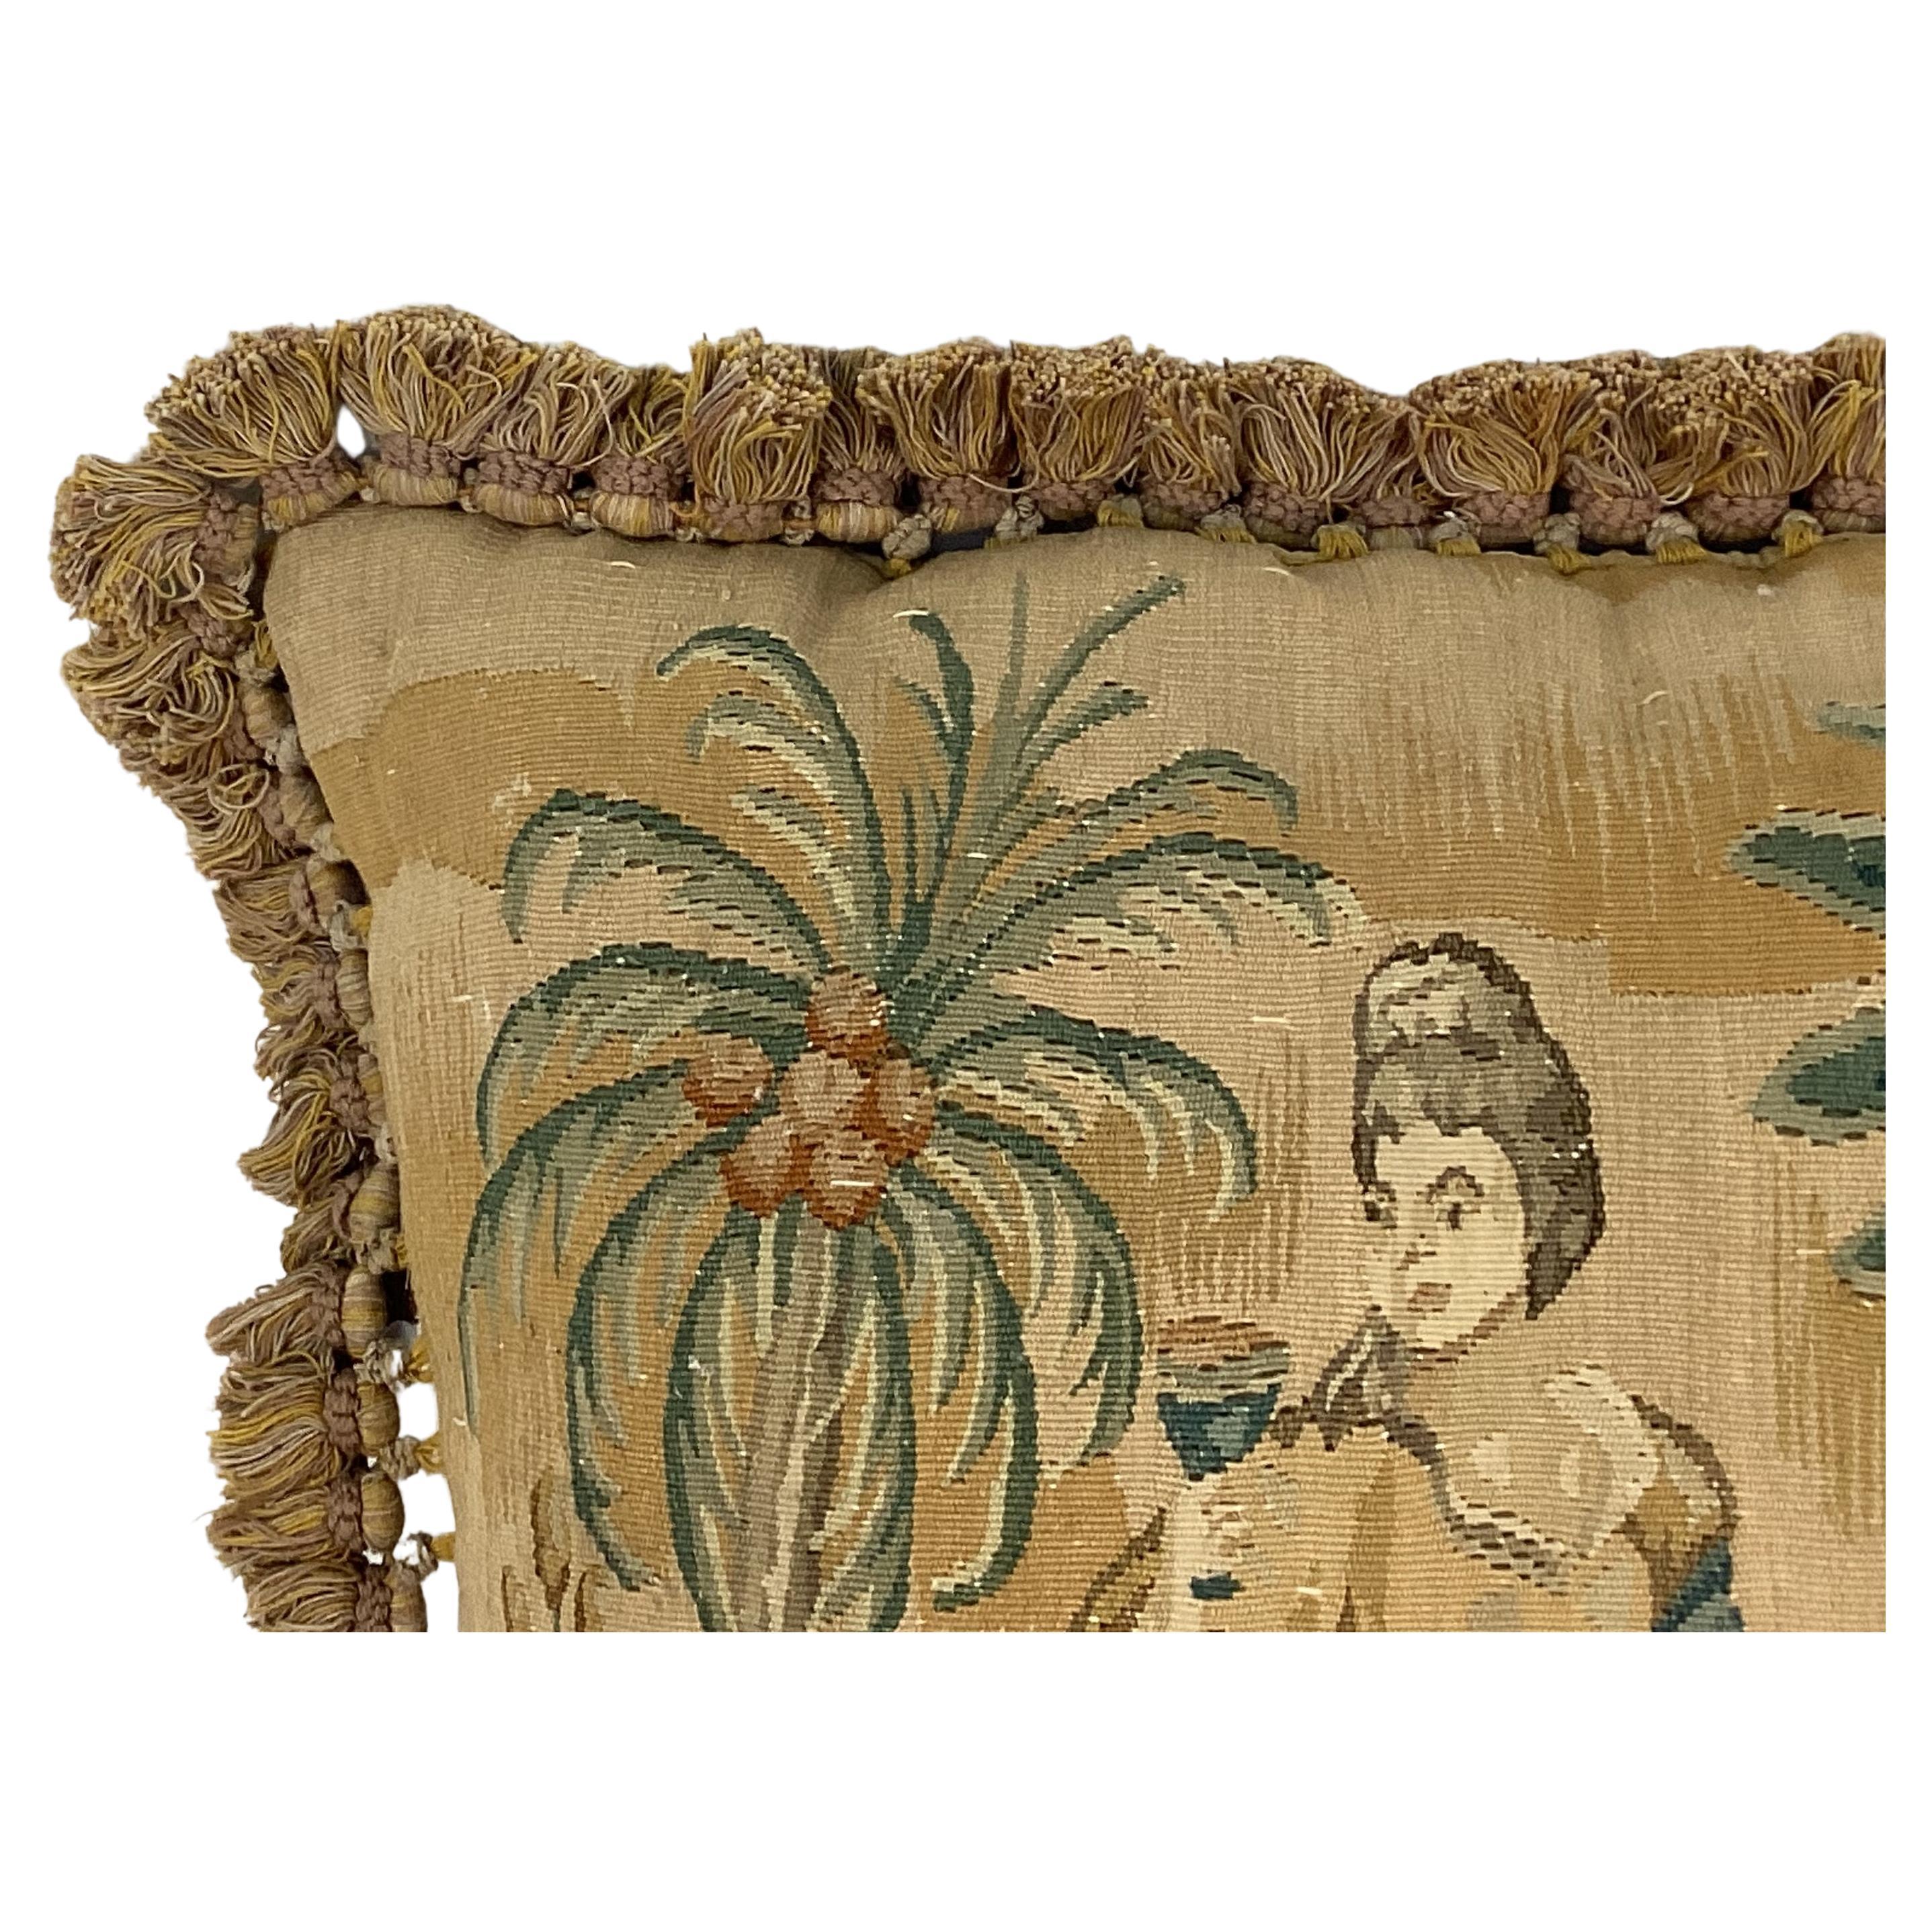 19th Century French custom made Hand-Woven Tapestry with pillow insert (included).  Tapestry features a beautiful outdoor setting of a woman eating fruit under palm trees in soft tan, green and brown colors. Backing is newer cotton velvet and border